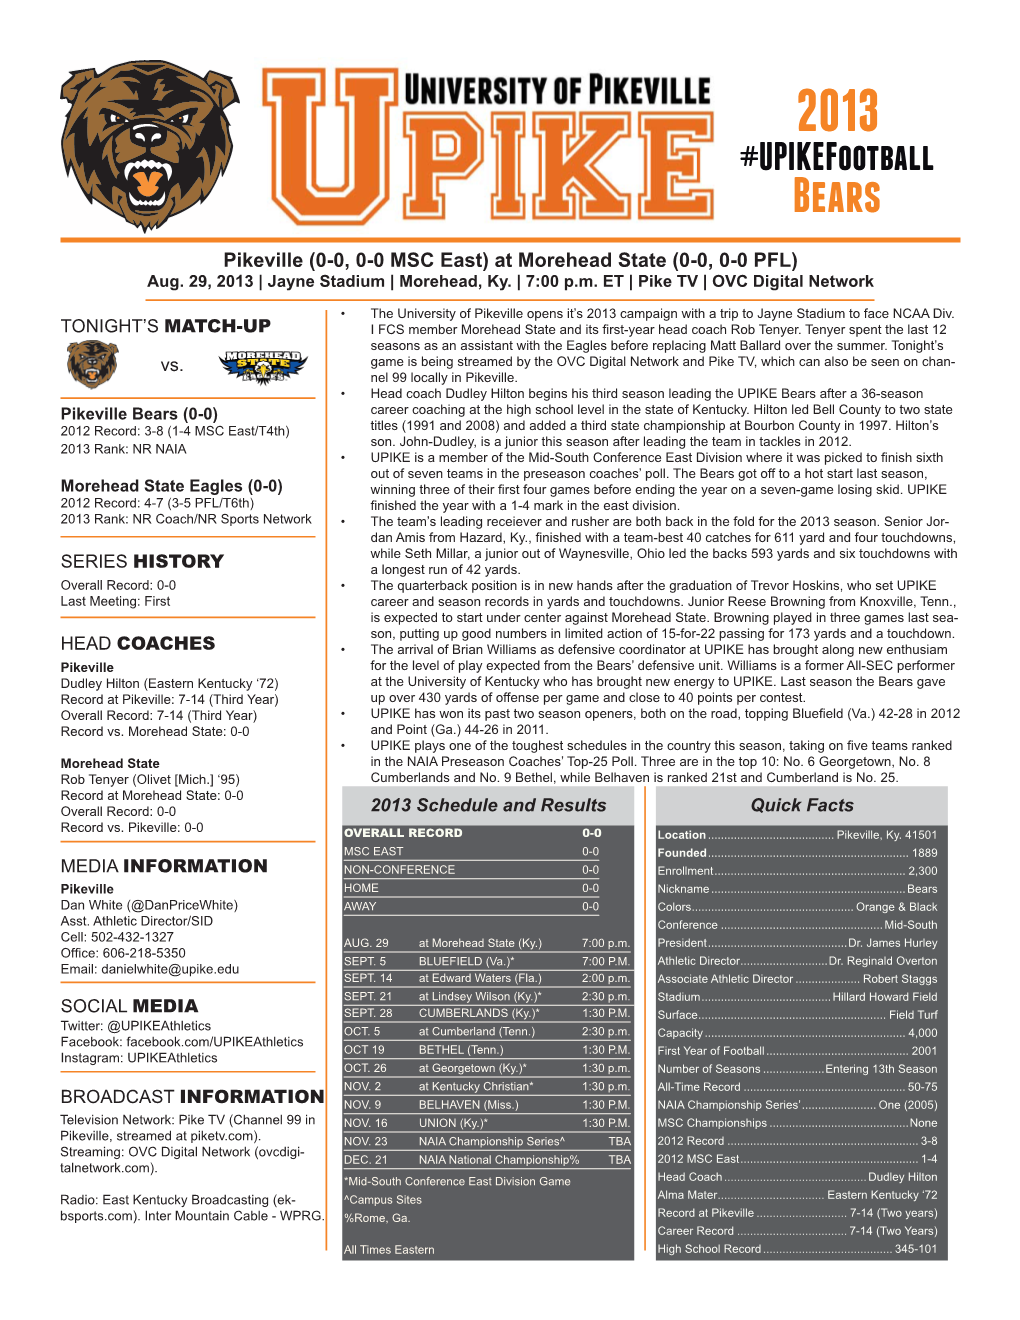 UPIKE FB Game Notes 082913 Morehead State.Indd